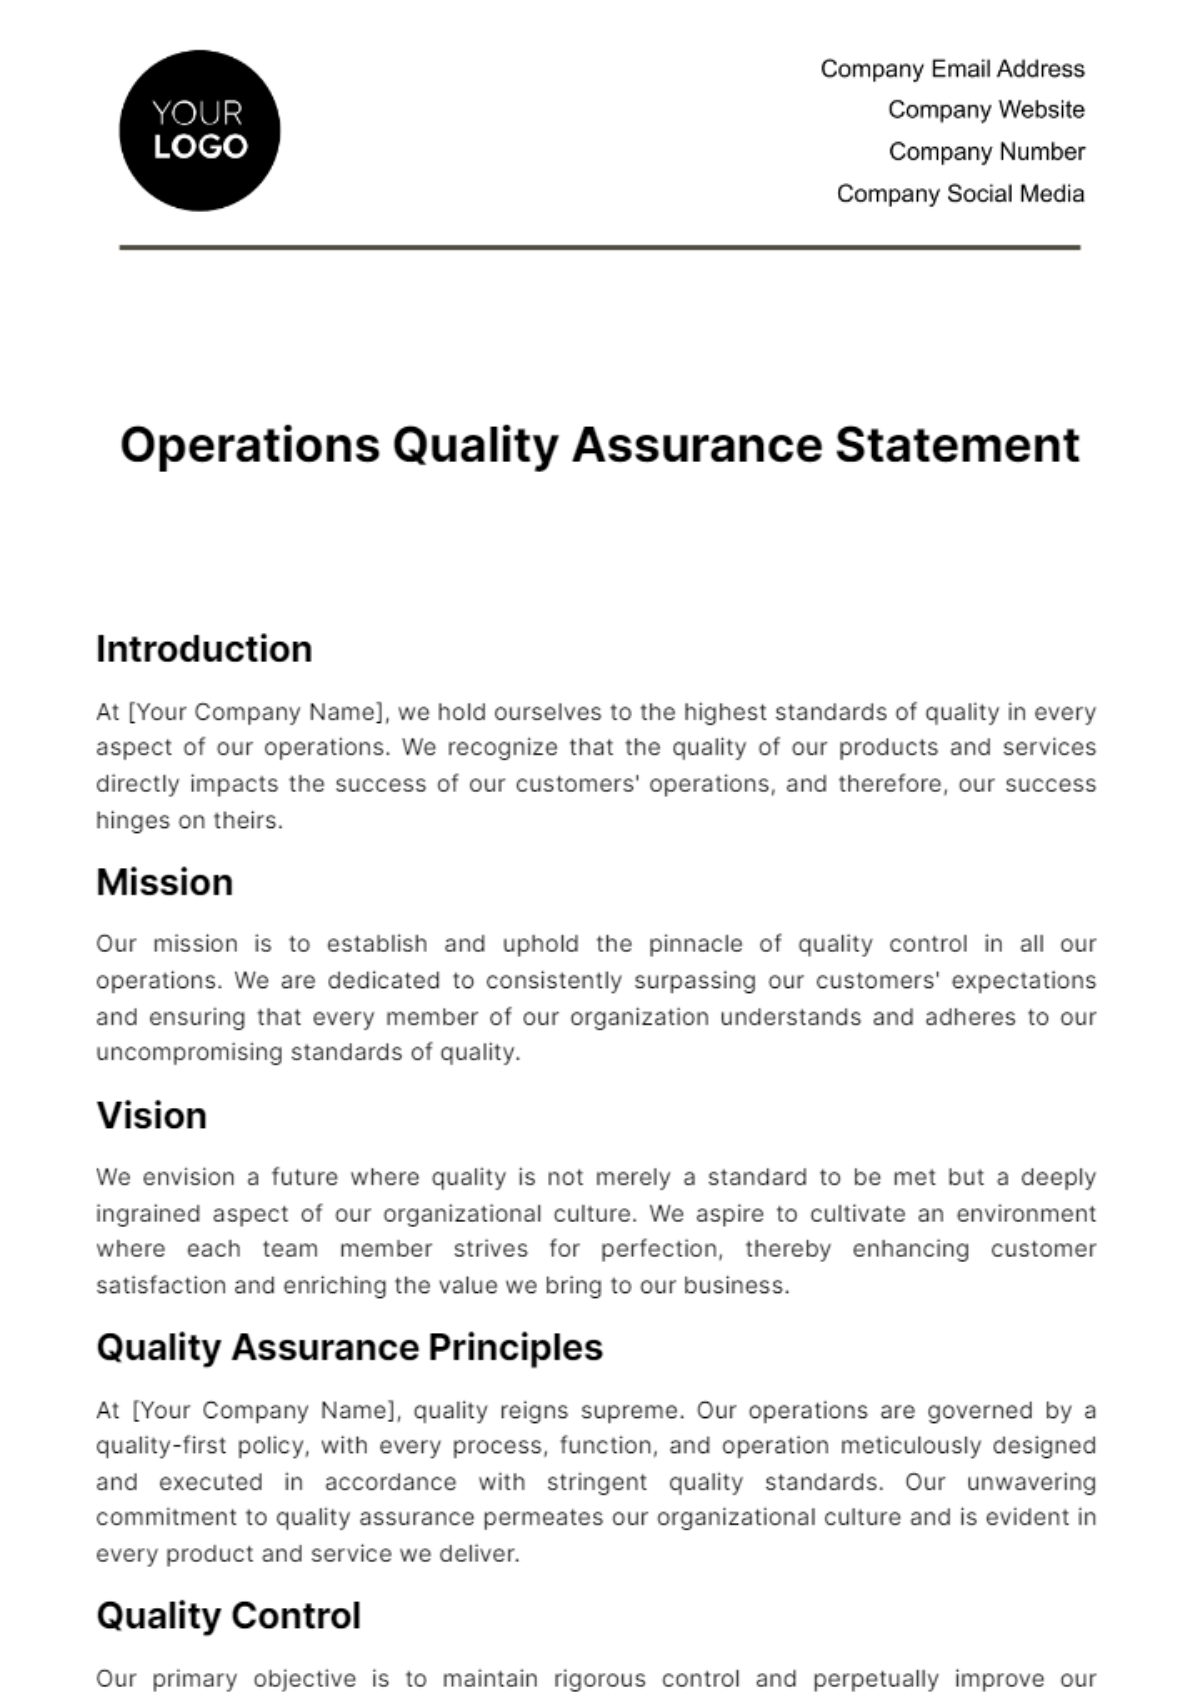 Operations Quality Assurance Statement Template